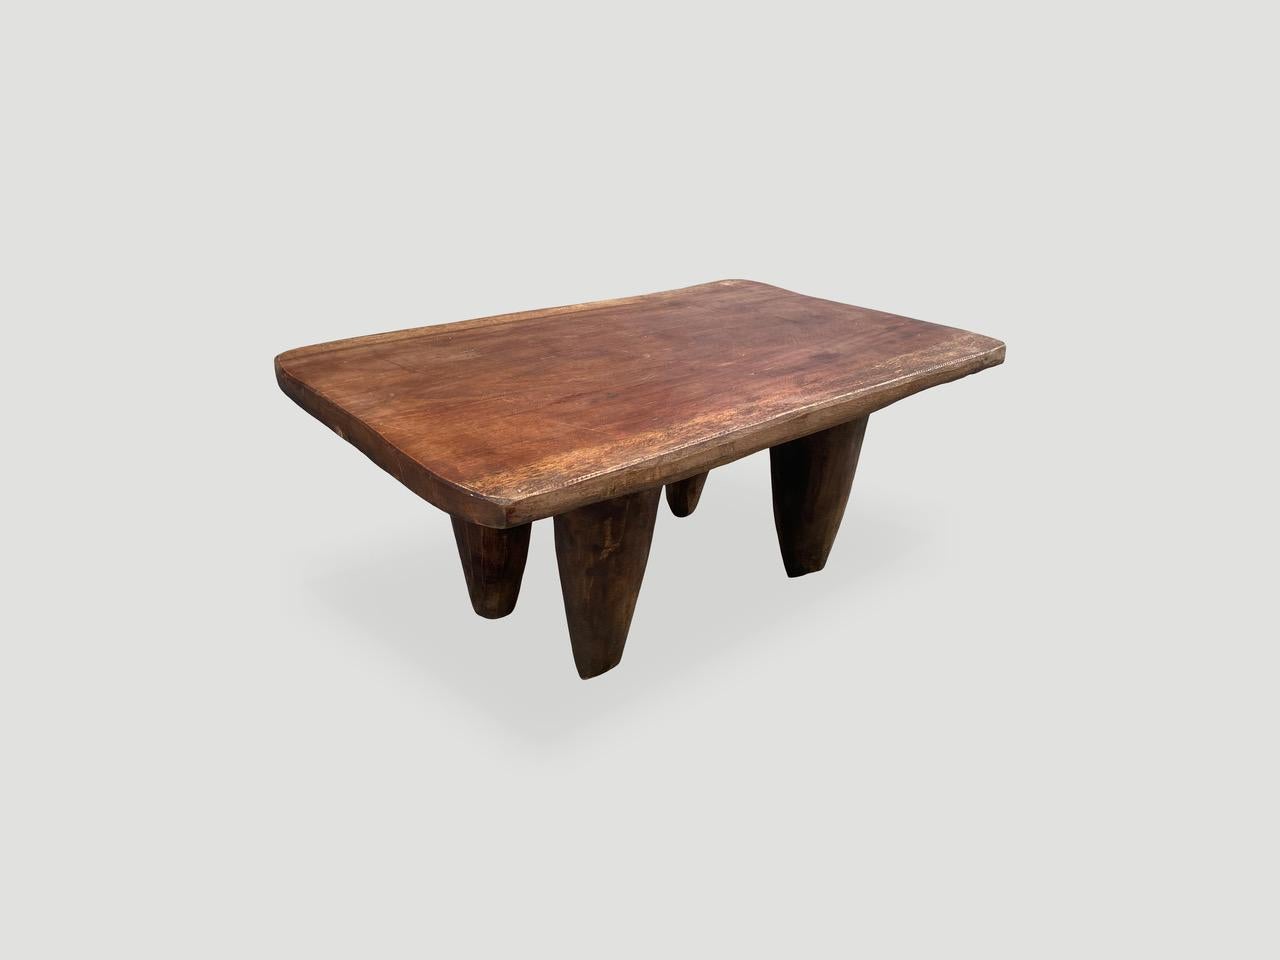 Antique coffee table, bench or side table, hand carved by the Senufo tribes from a single block of iroko wood, native to the west coast of Africa. The wood is tough, dense and very durable. Shown with cone style legs. This smaller size is rare.